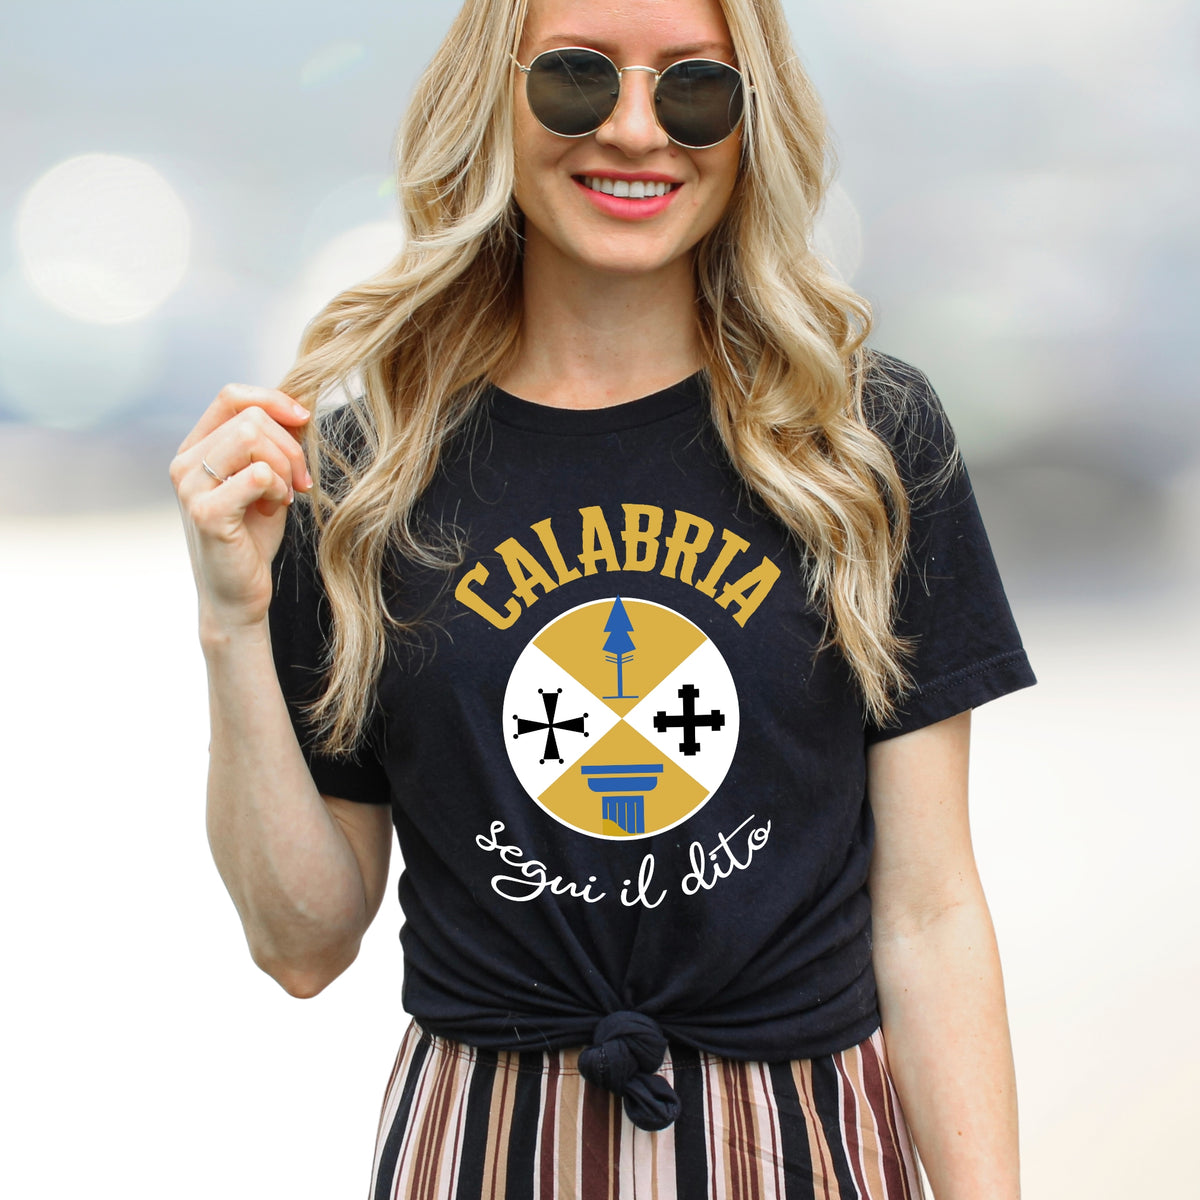 Calabria Italy Coat of Arms Travel Shirt | Italian World Travel Gift | Unisex Jersey T-shirt